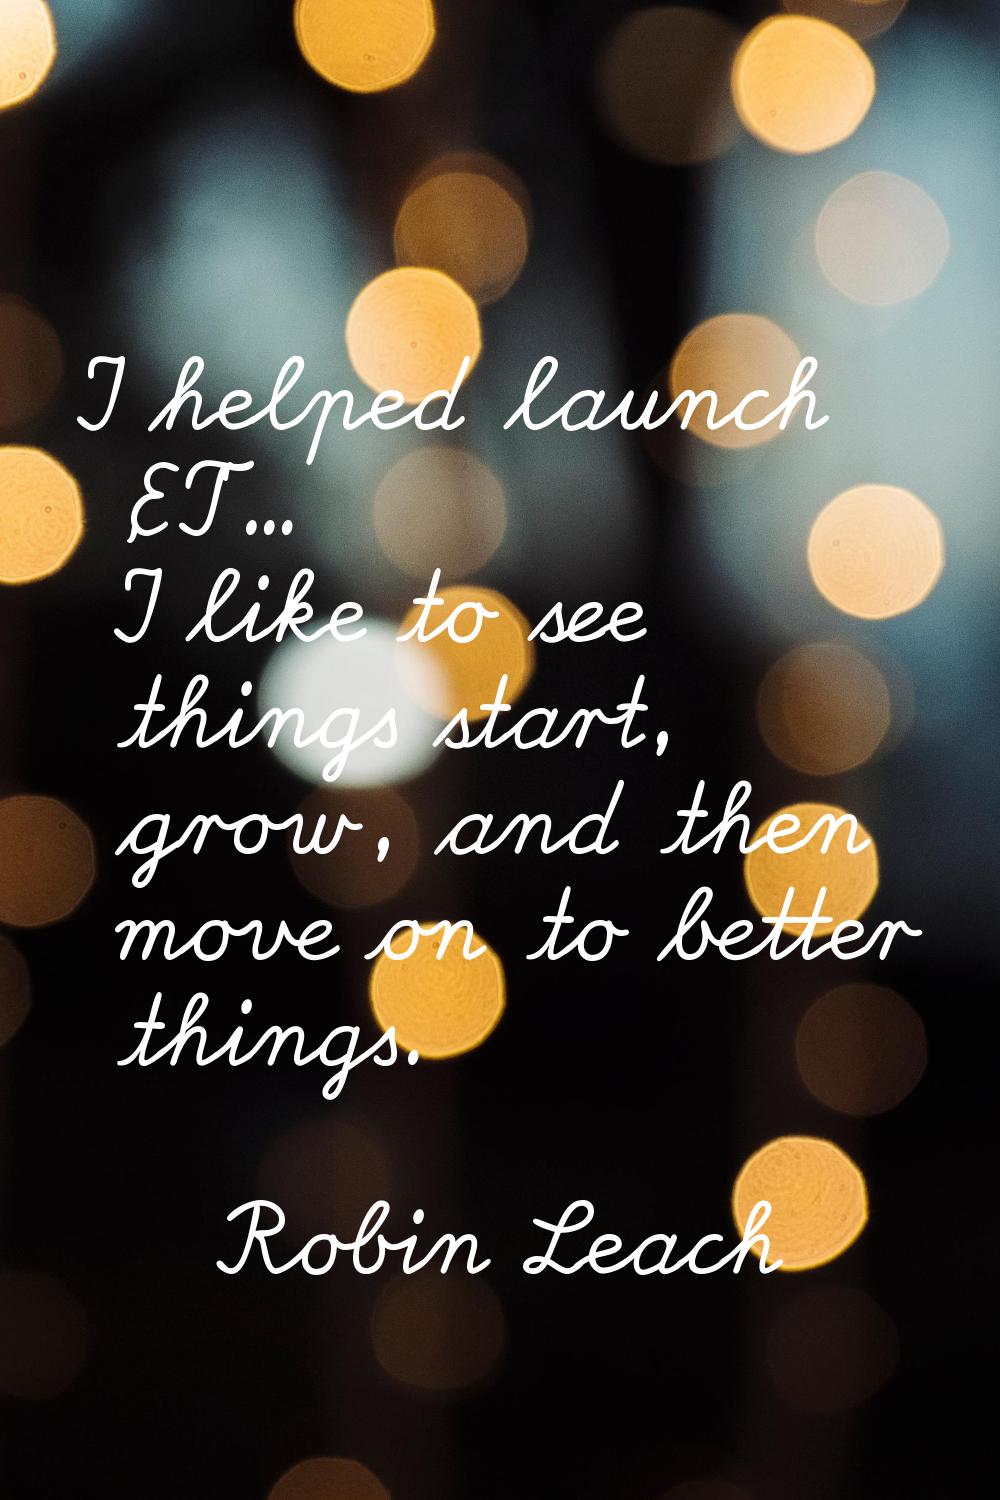 I helped launch 'ET'... I like to see things start, grow, and then move on to better things.